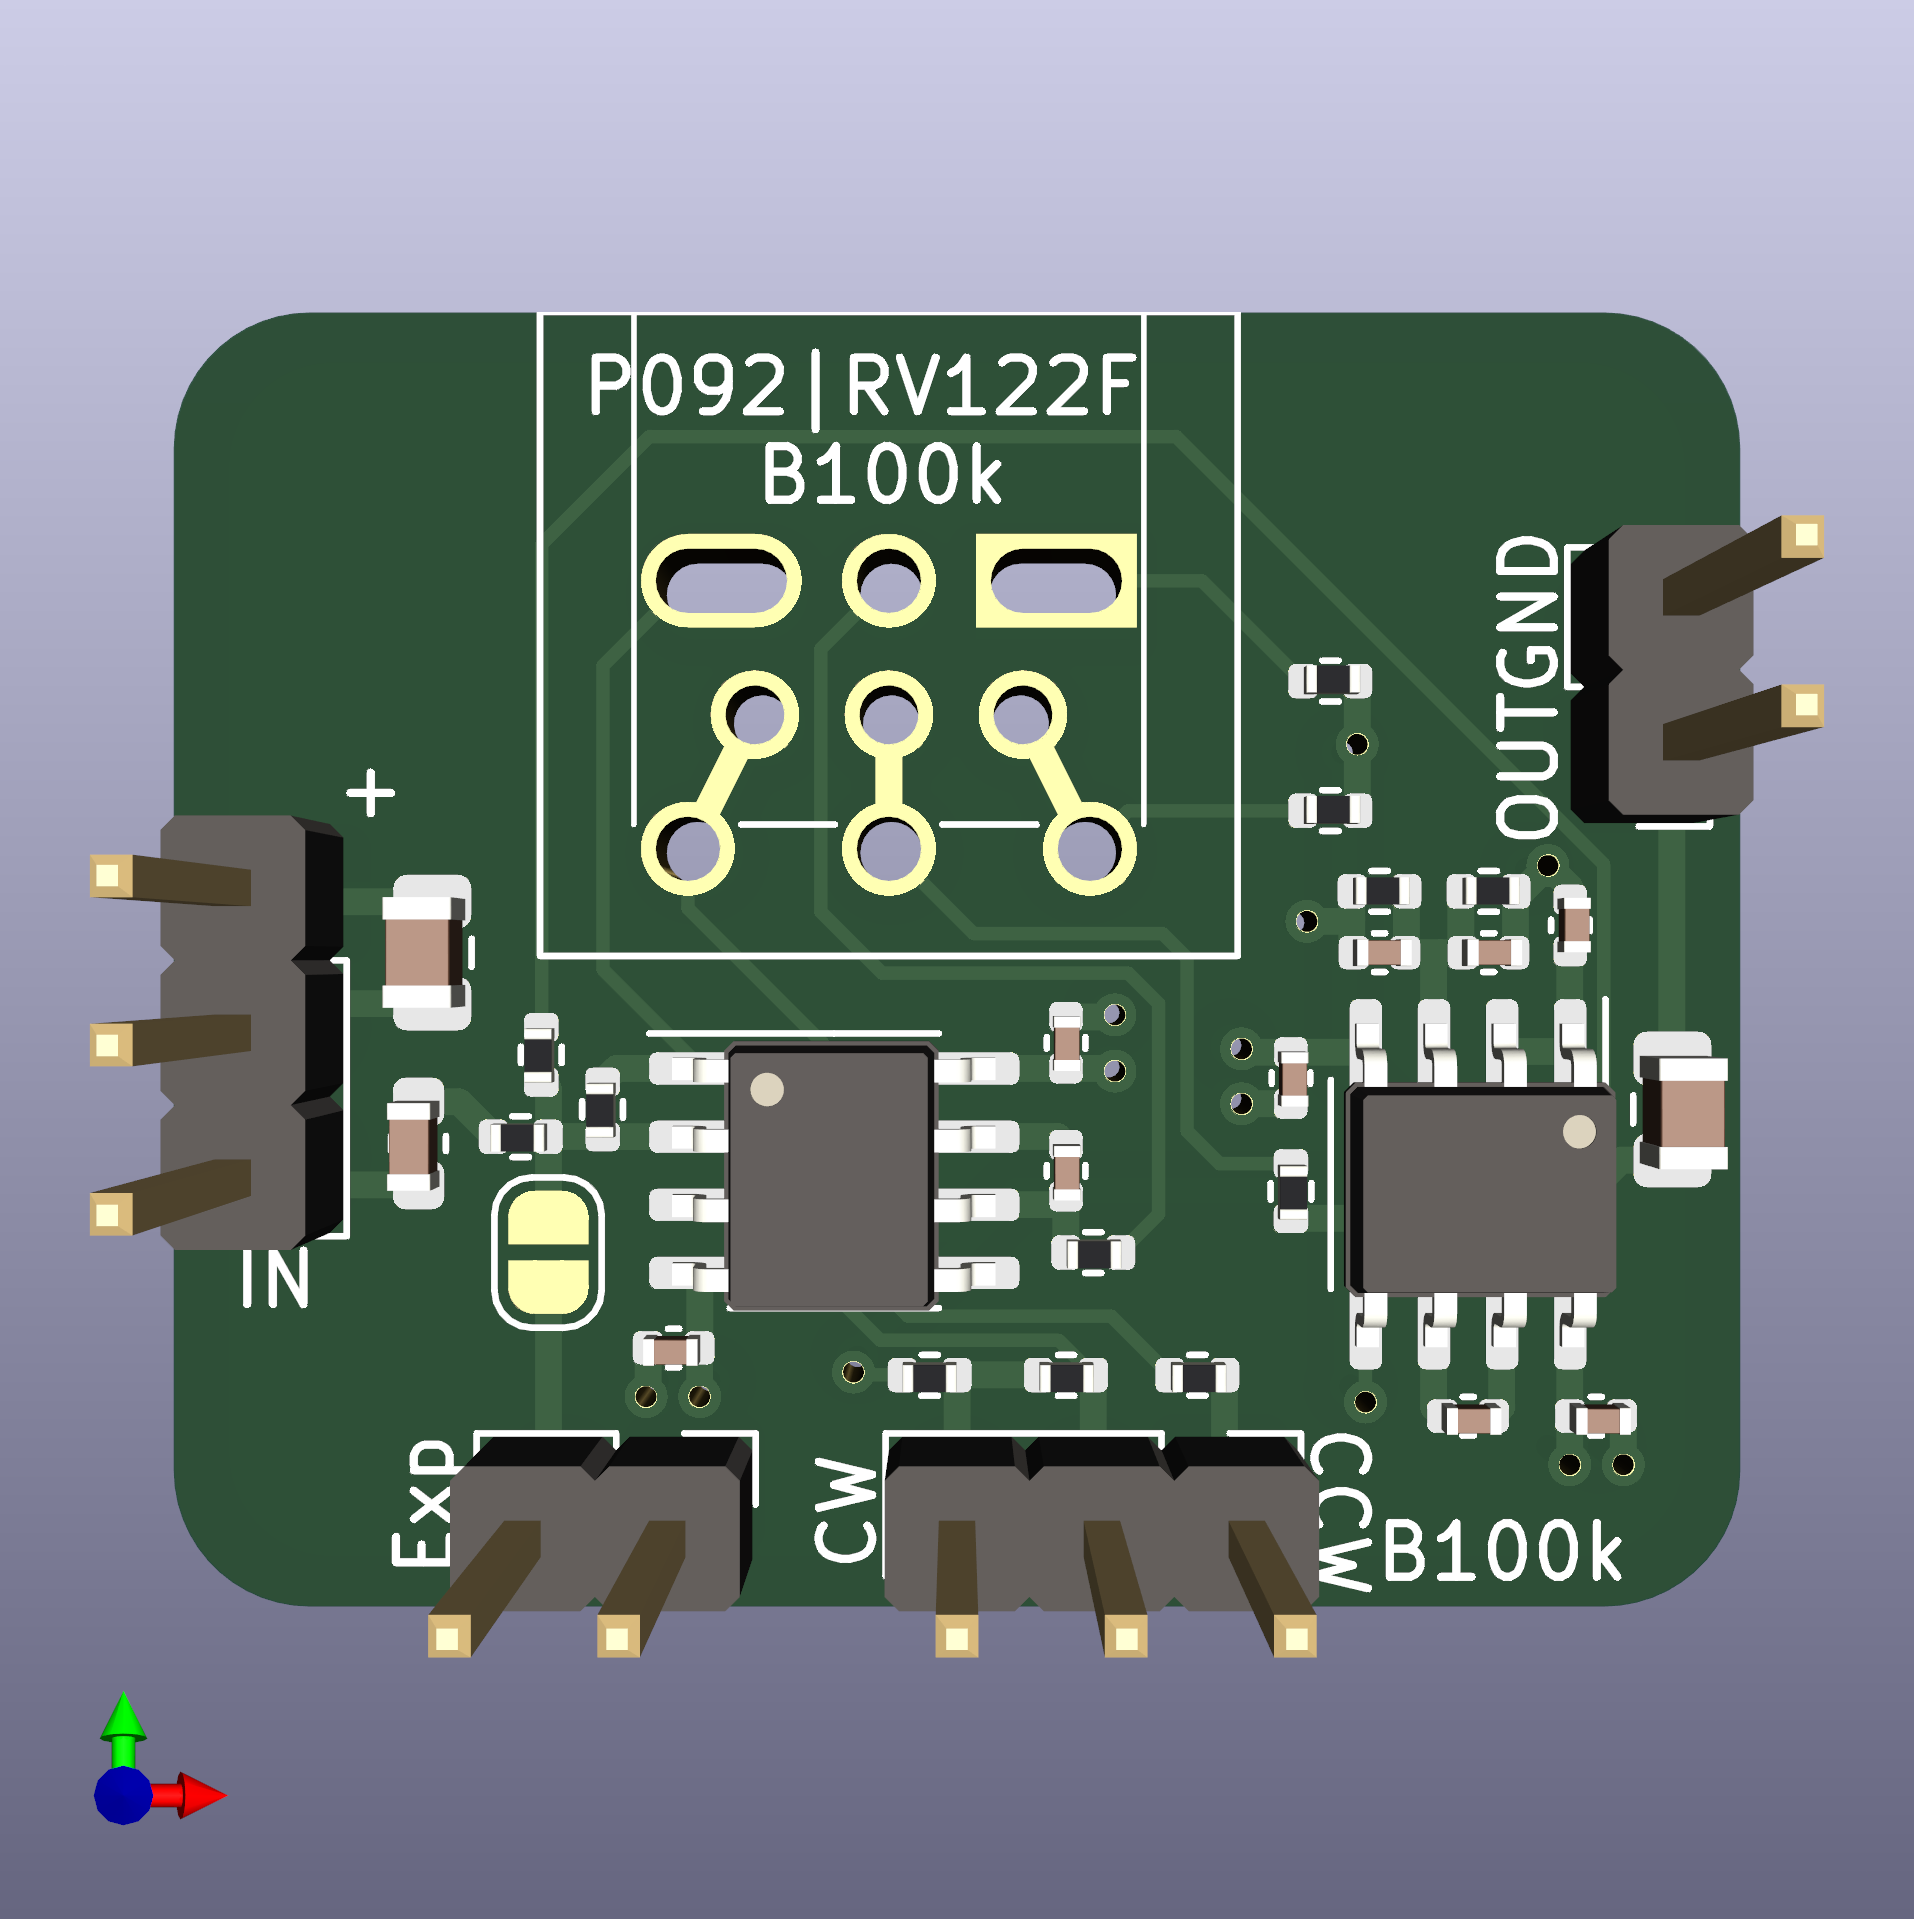 Three-dimensional rendering of another PCB with a custom footprint that allows different potentiometers to be used.